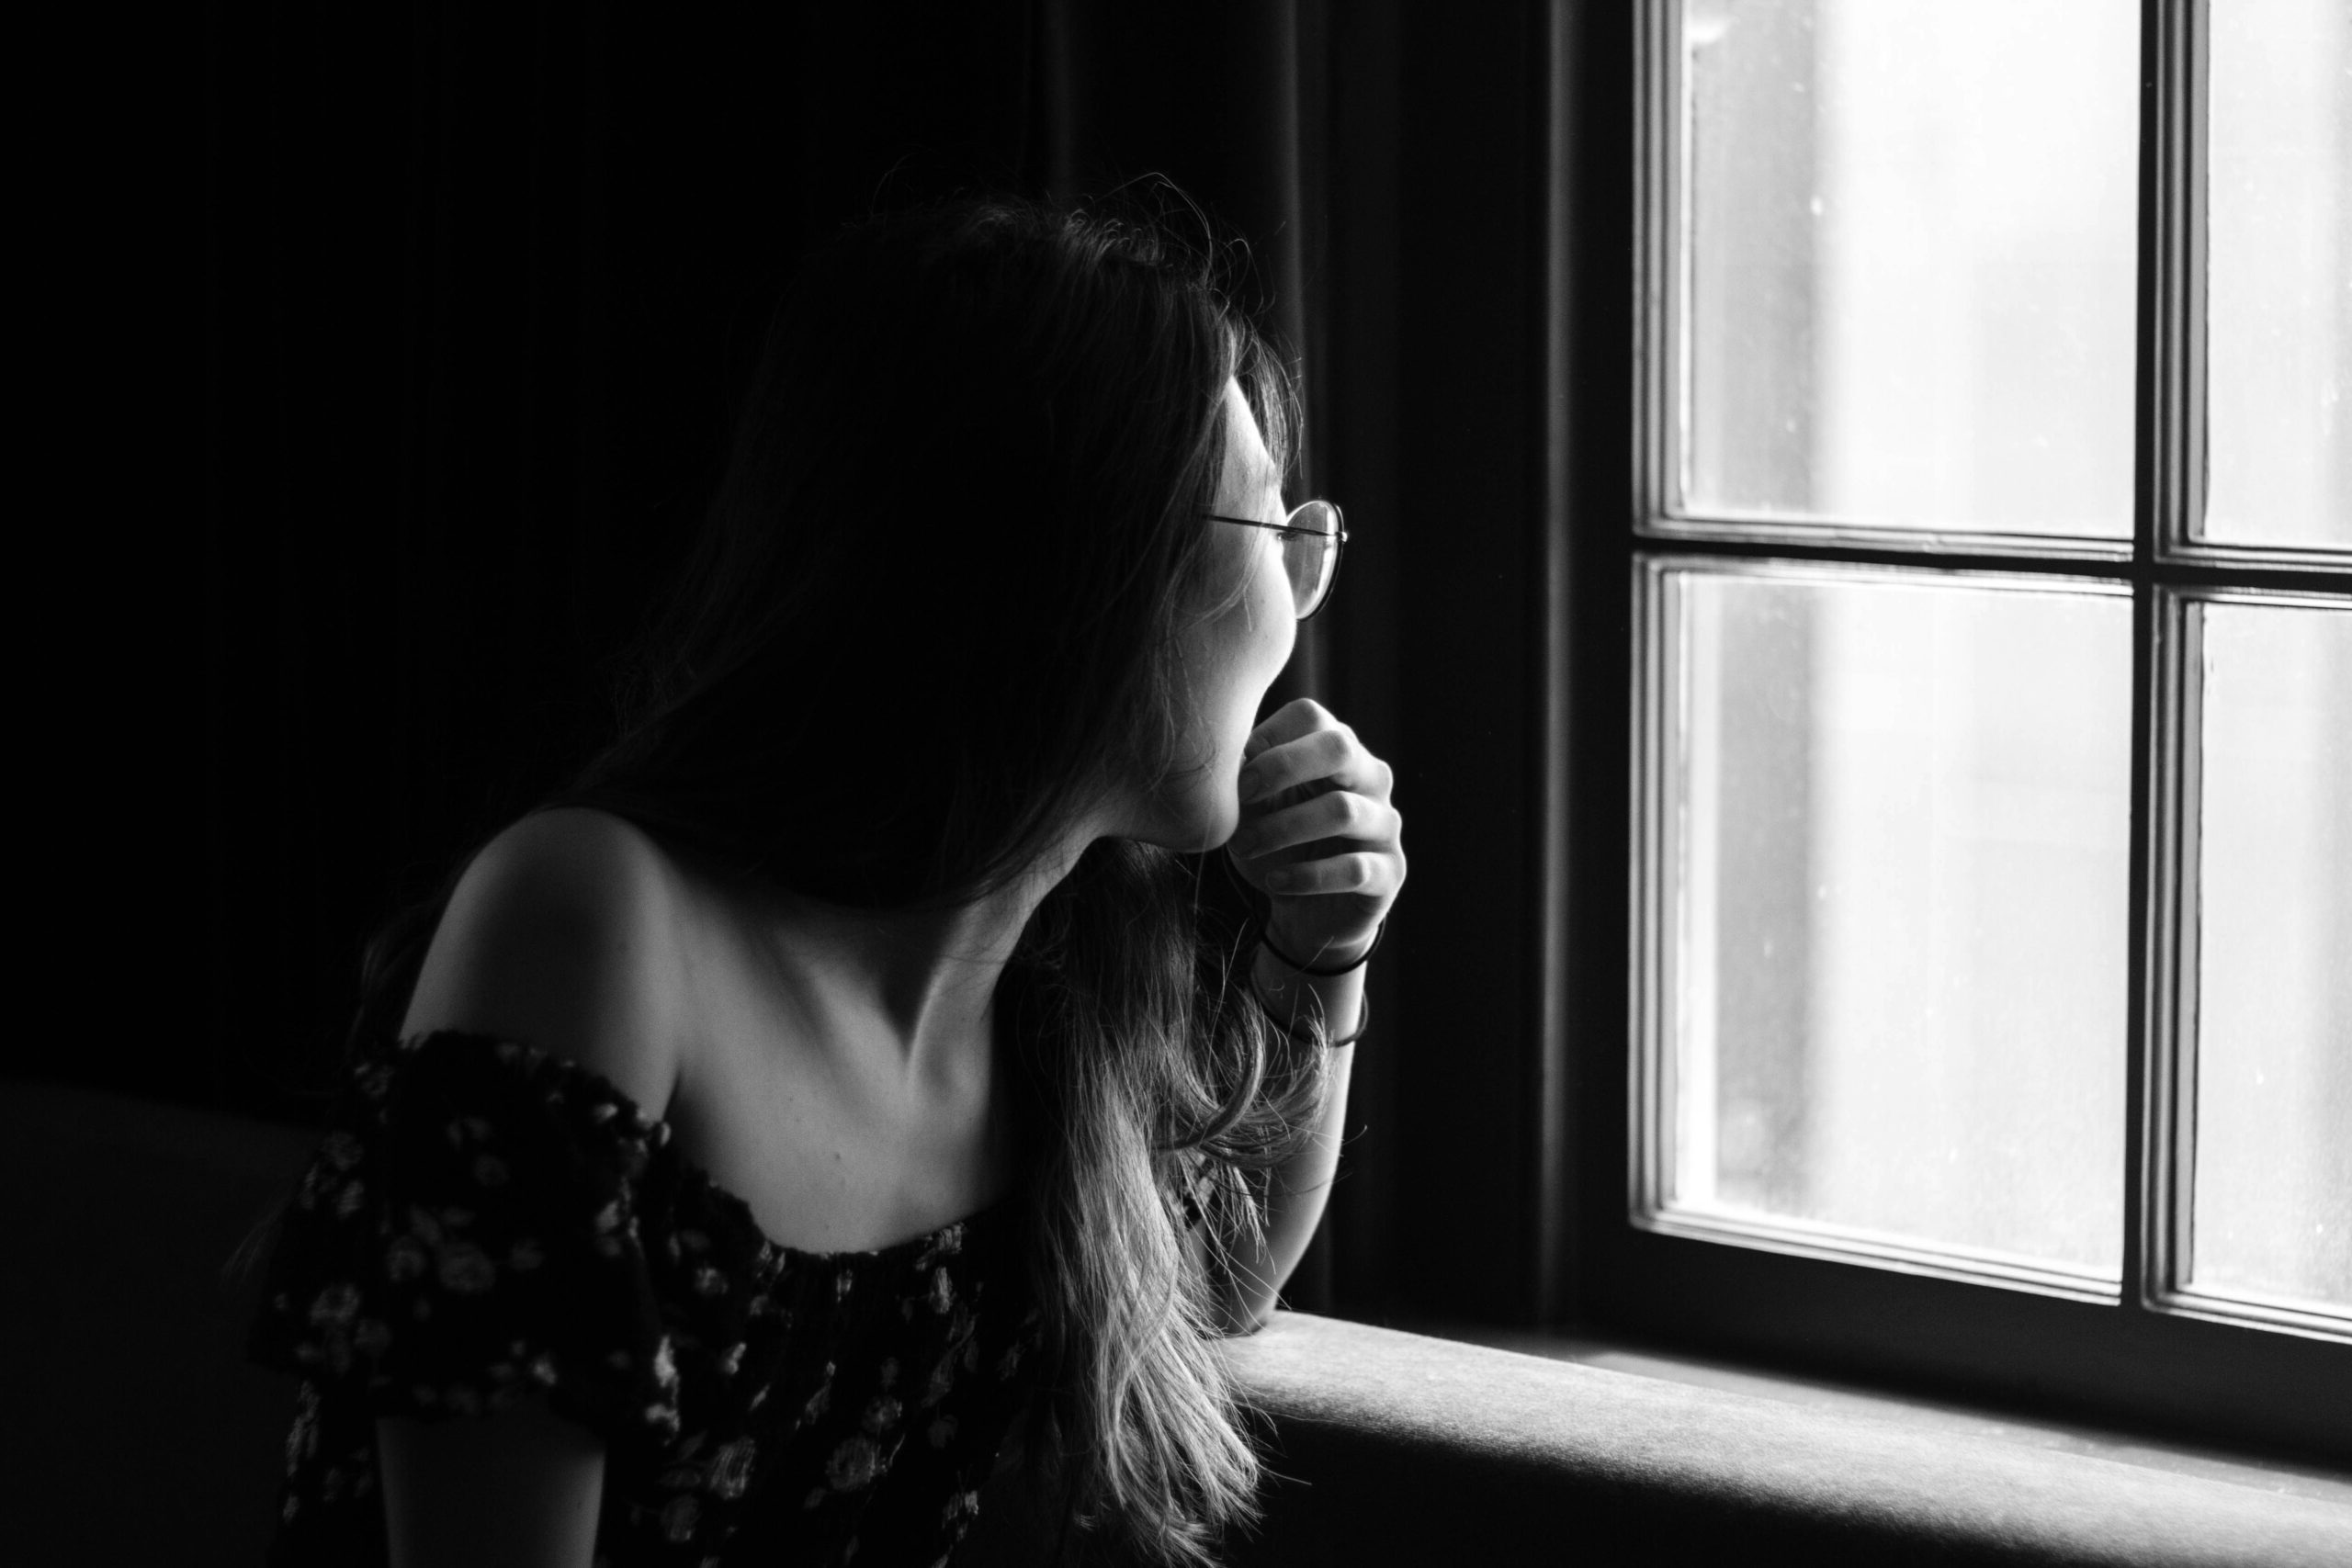 Grayscale photo of a young woman staring out of a window. The room she is in is dark, while there is light coming in through the window. She appears to be wearing glasses. There is nothing visible outside the window.